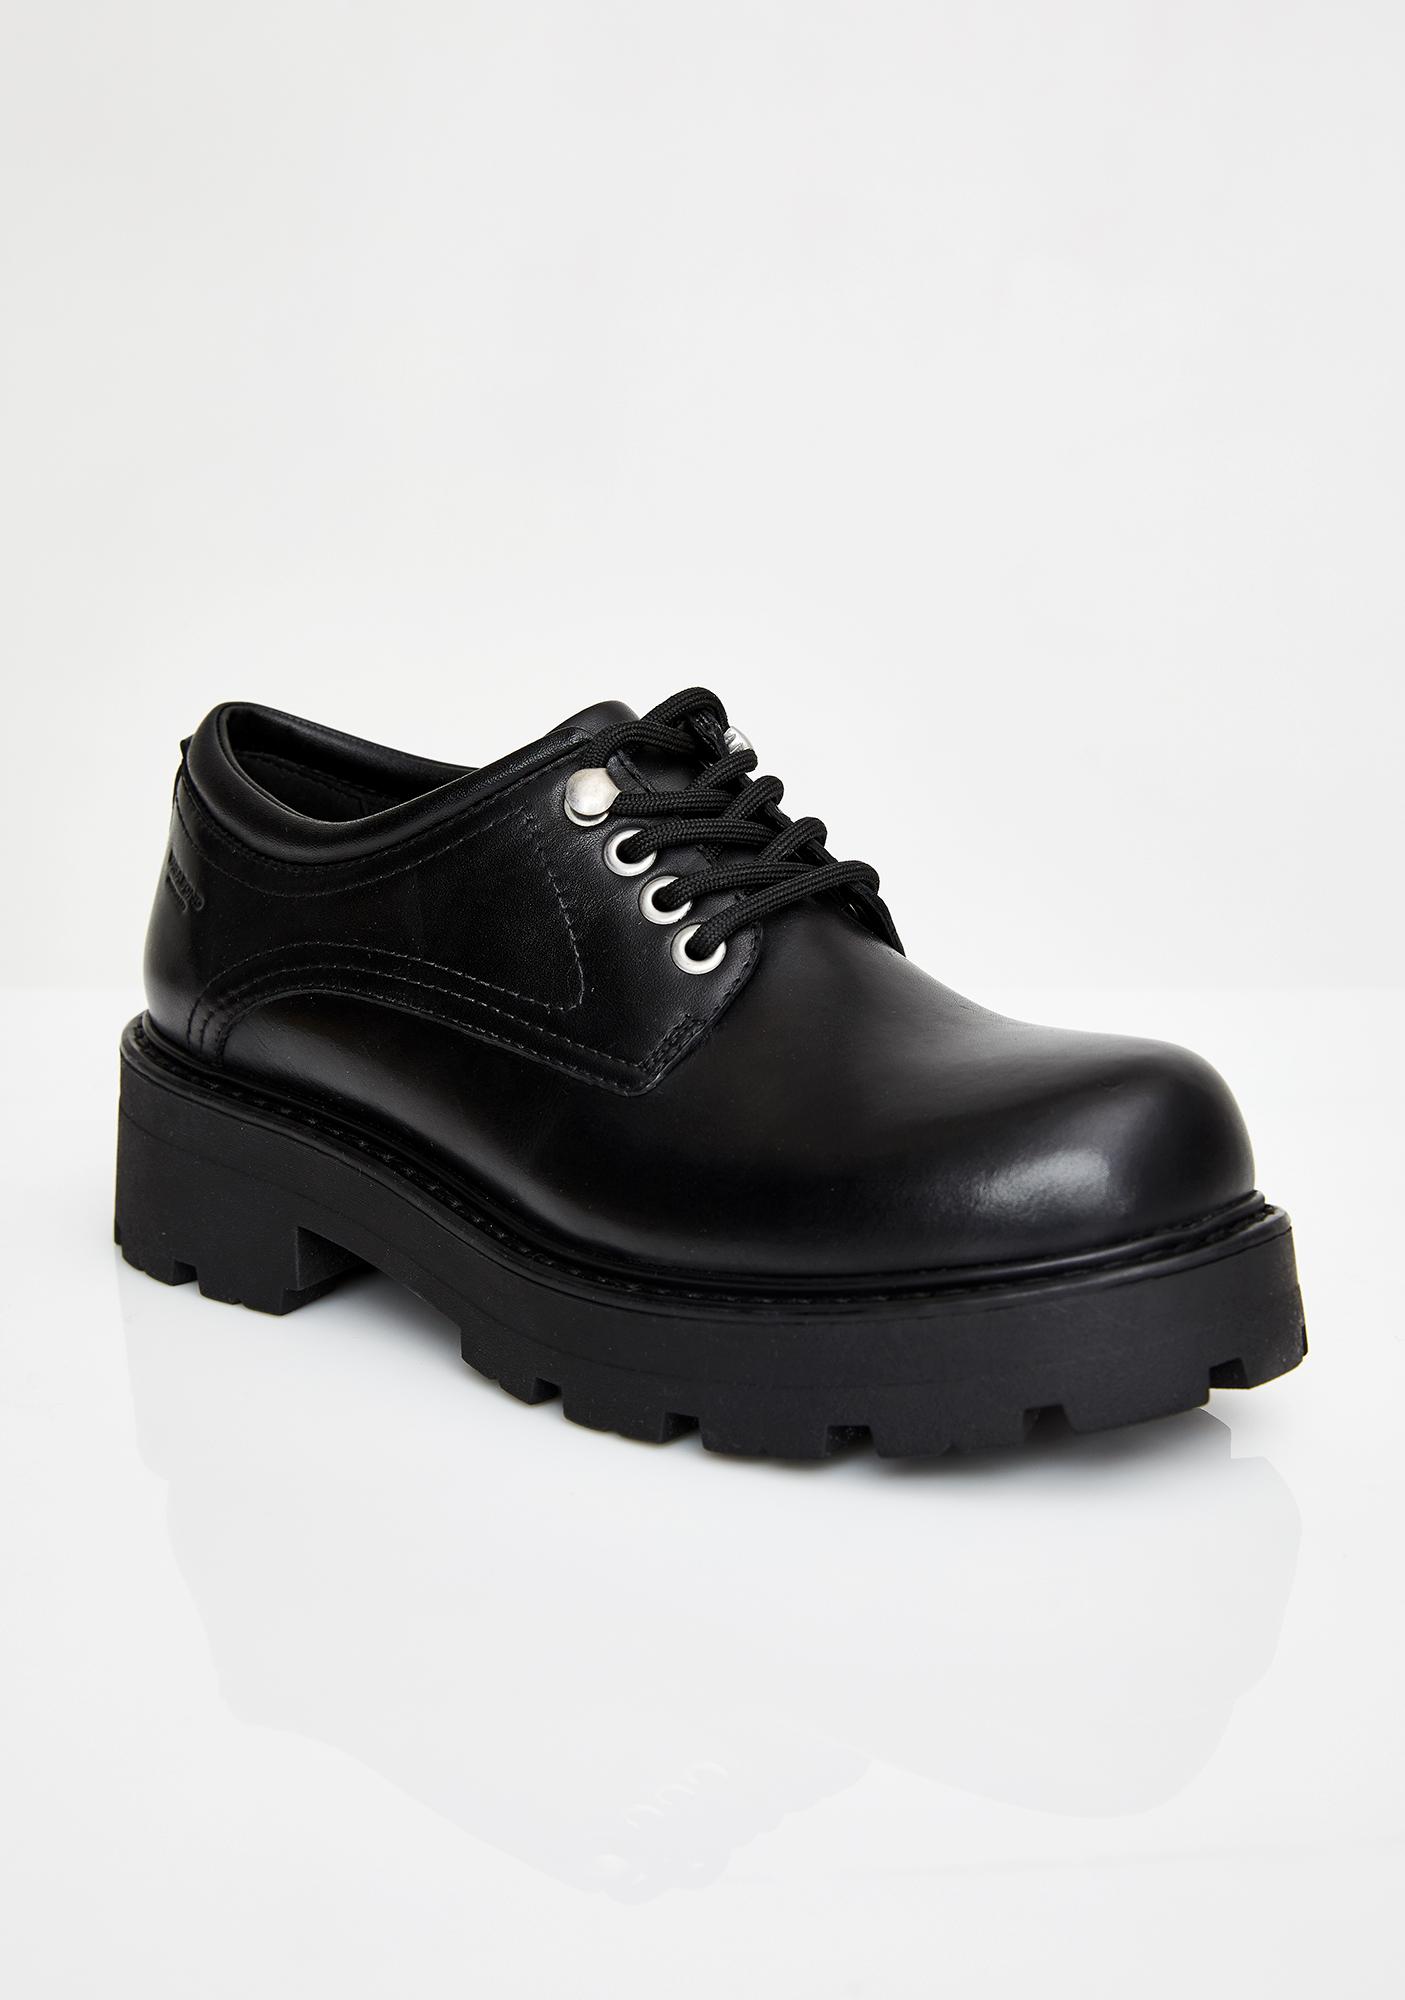 VAGABOND SHOEMAKERS Cosmo 2.0 Leather Oxfords | Dolls Kill